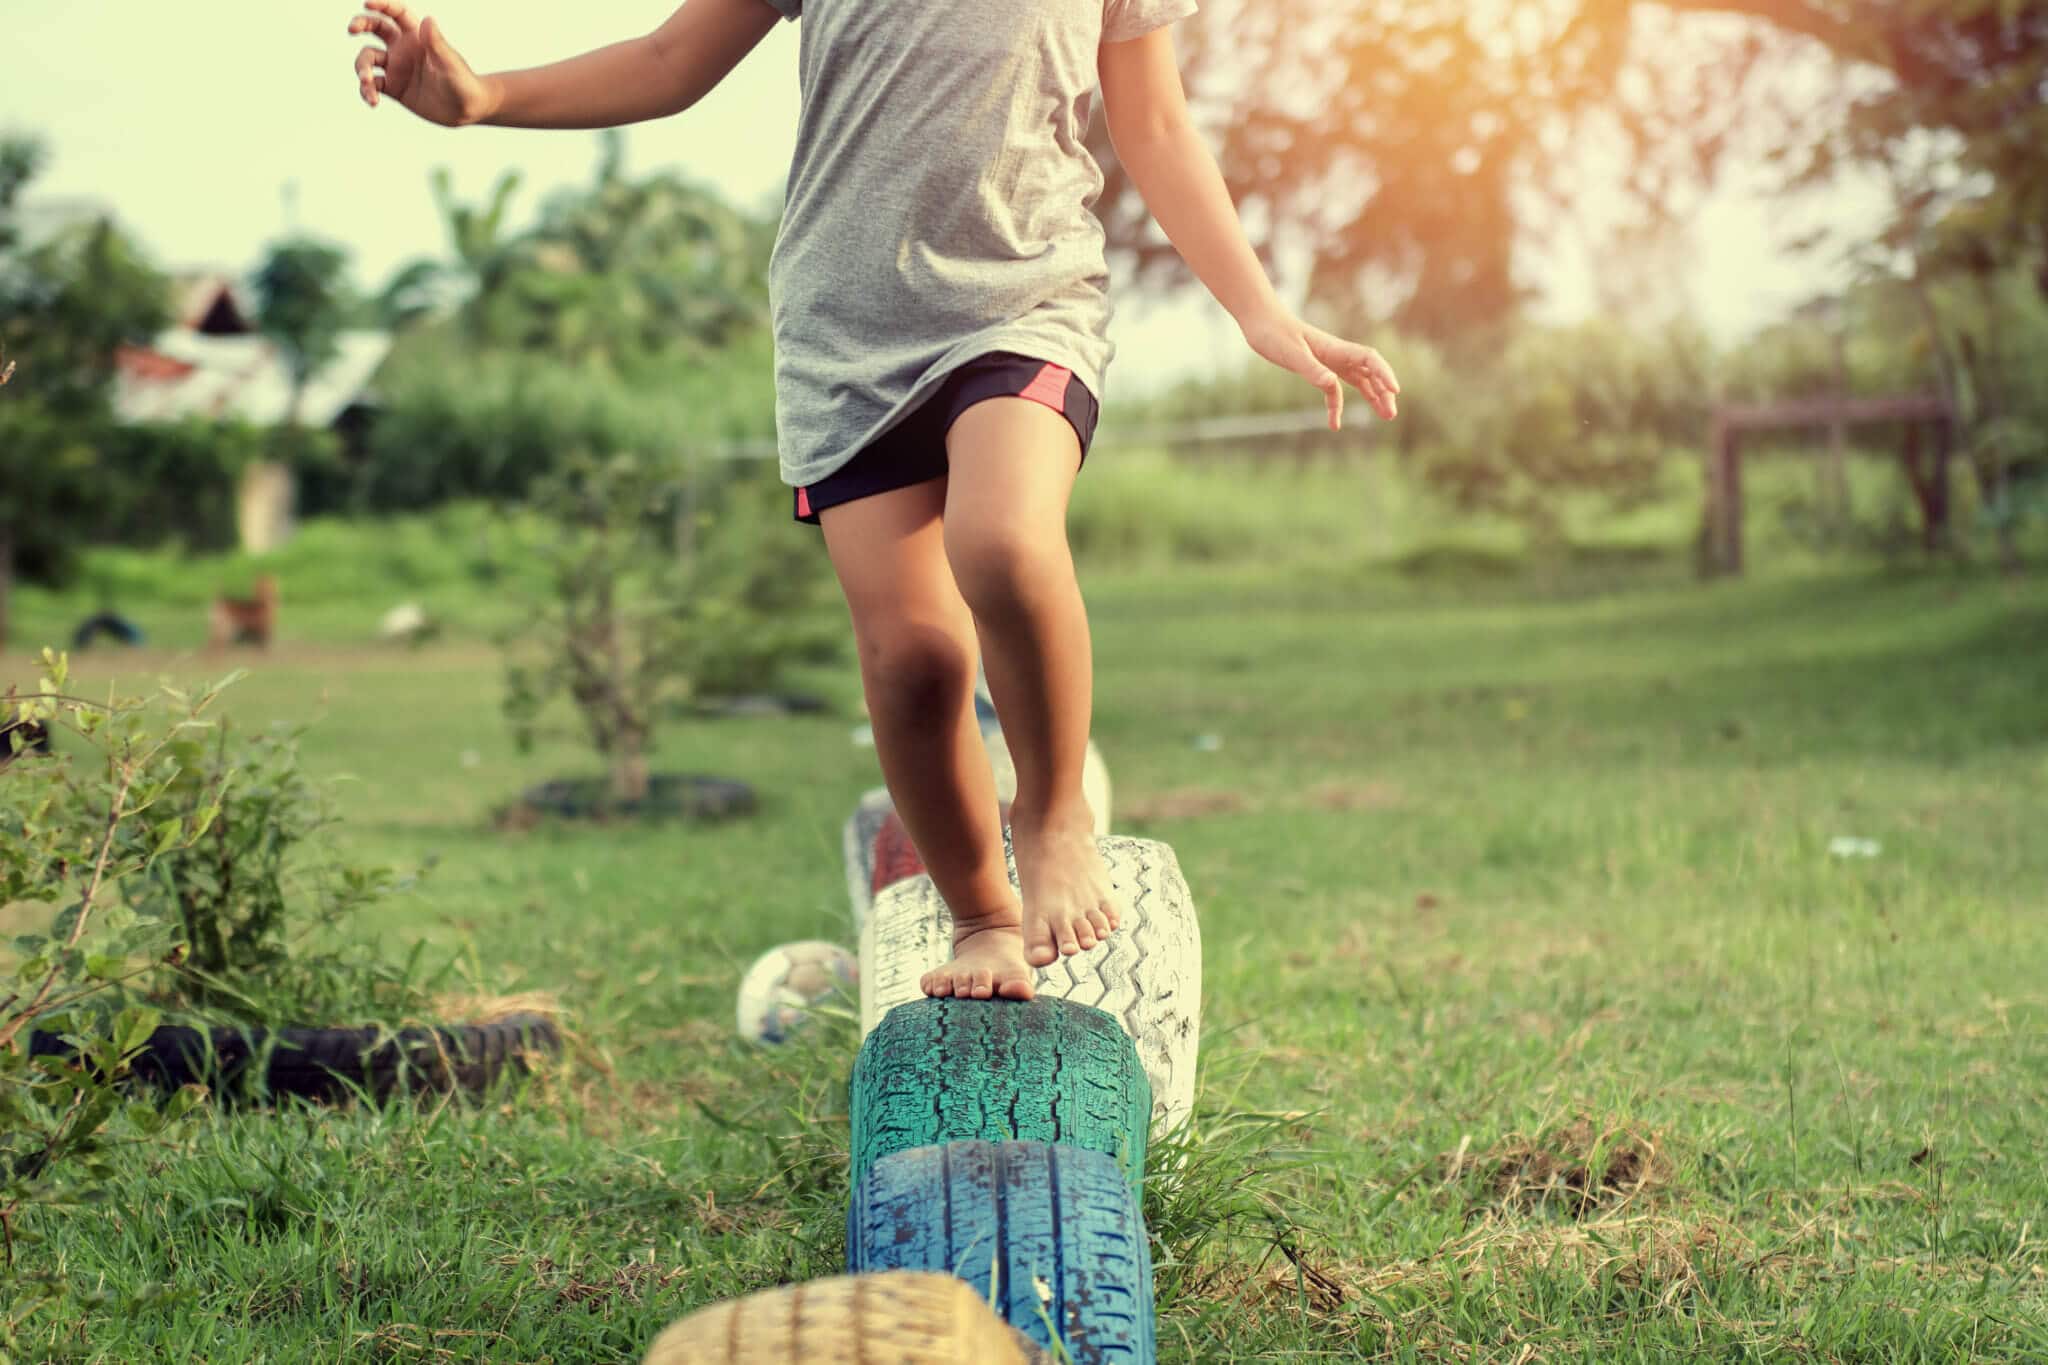 A child runs barefoot on toy tires in a playground